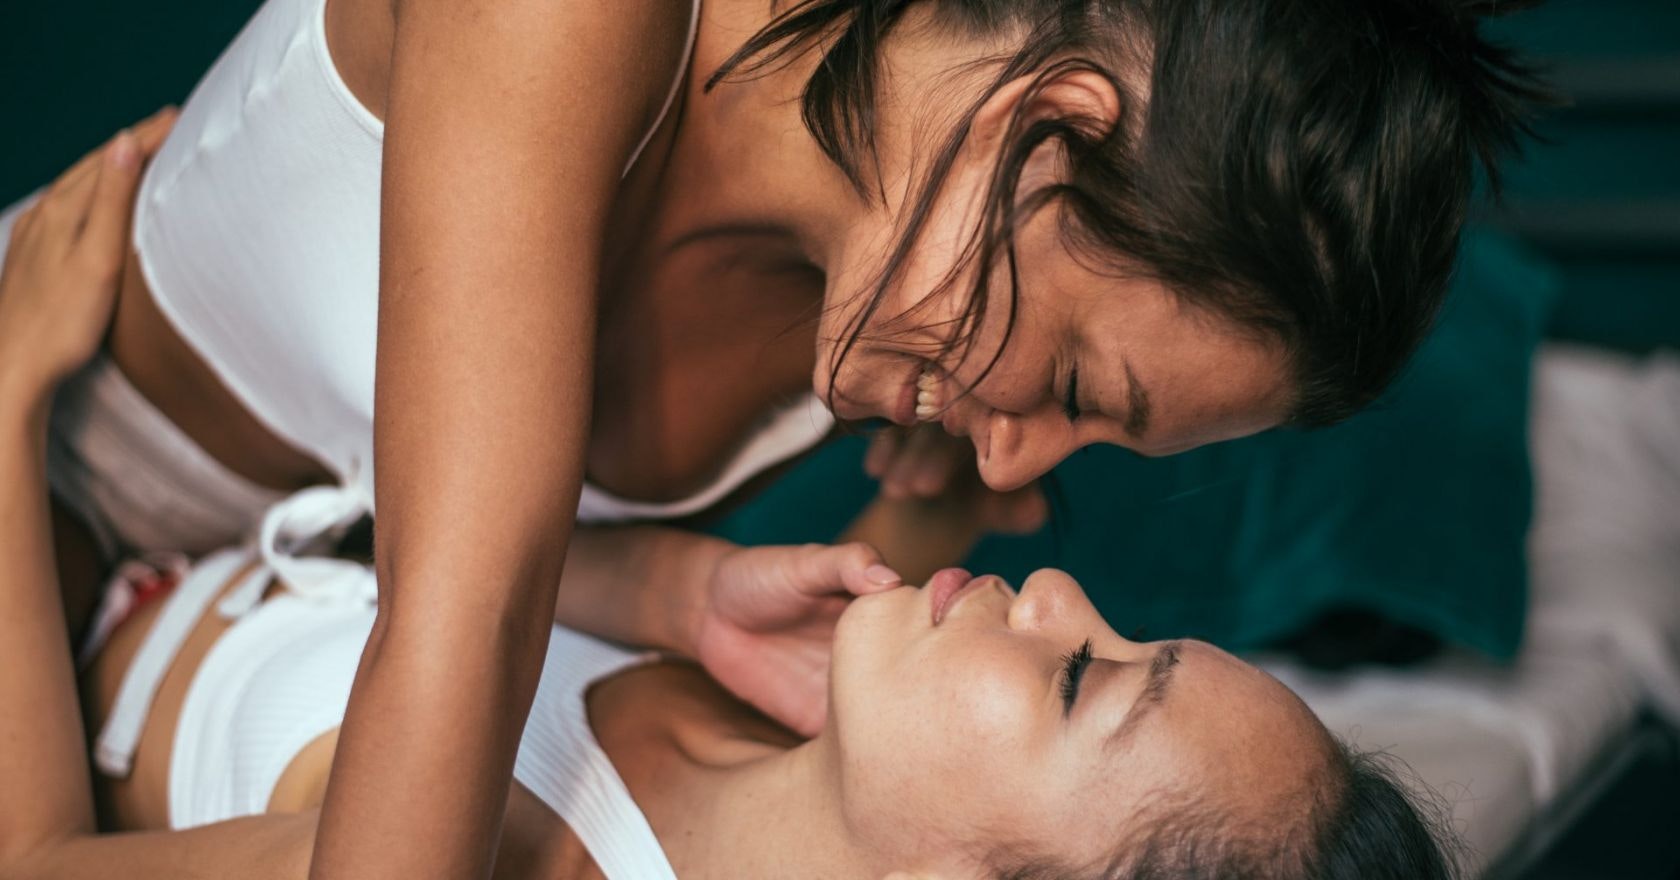 10 women discuss how important sex is in their relationships pic image